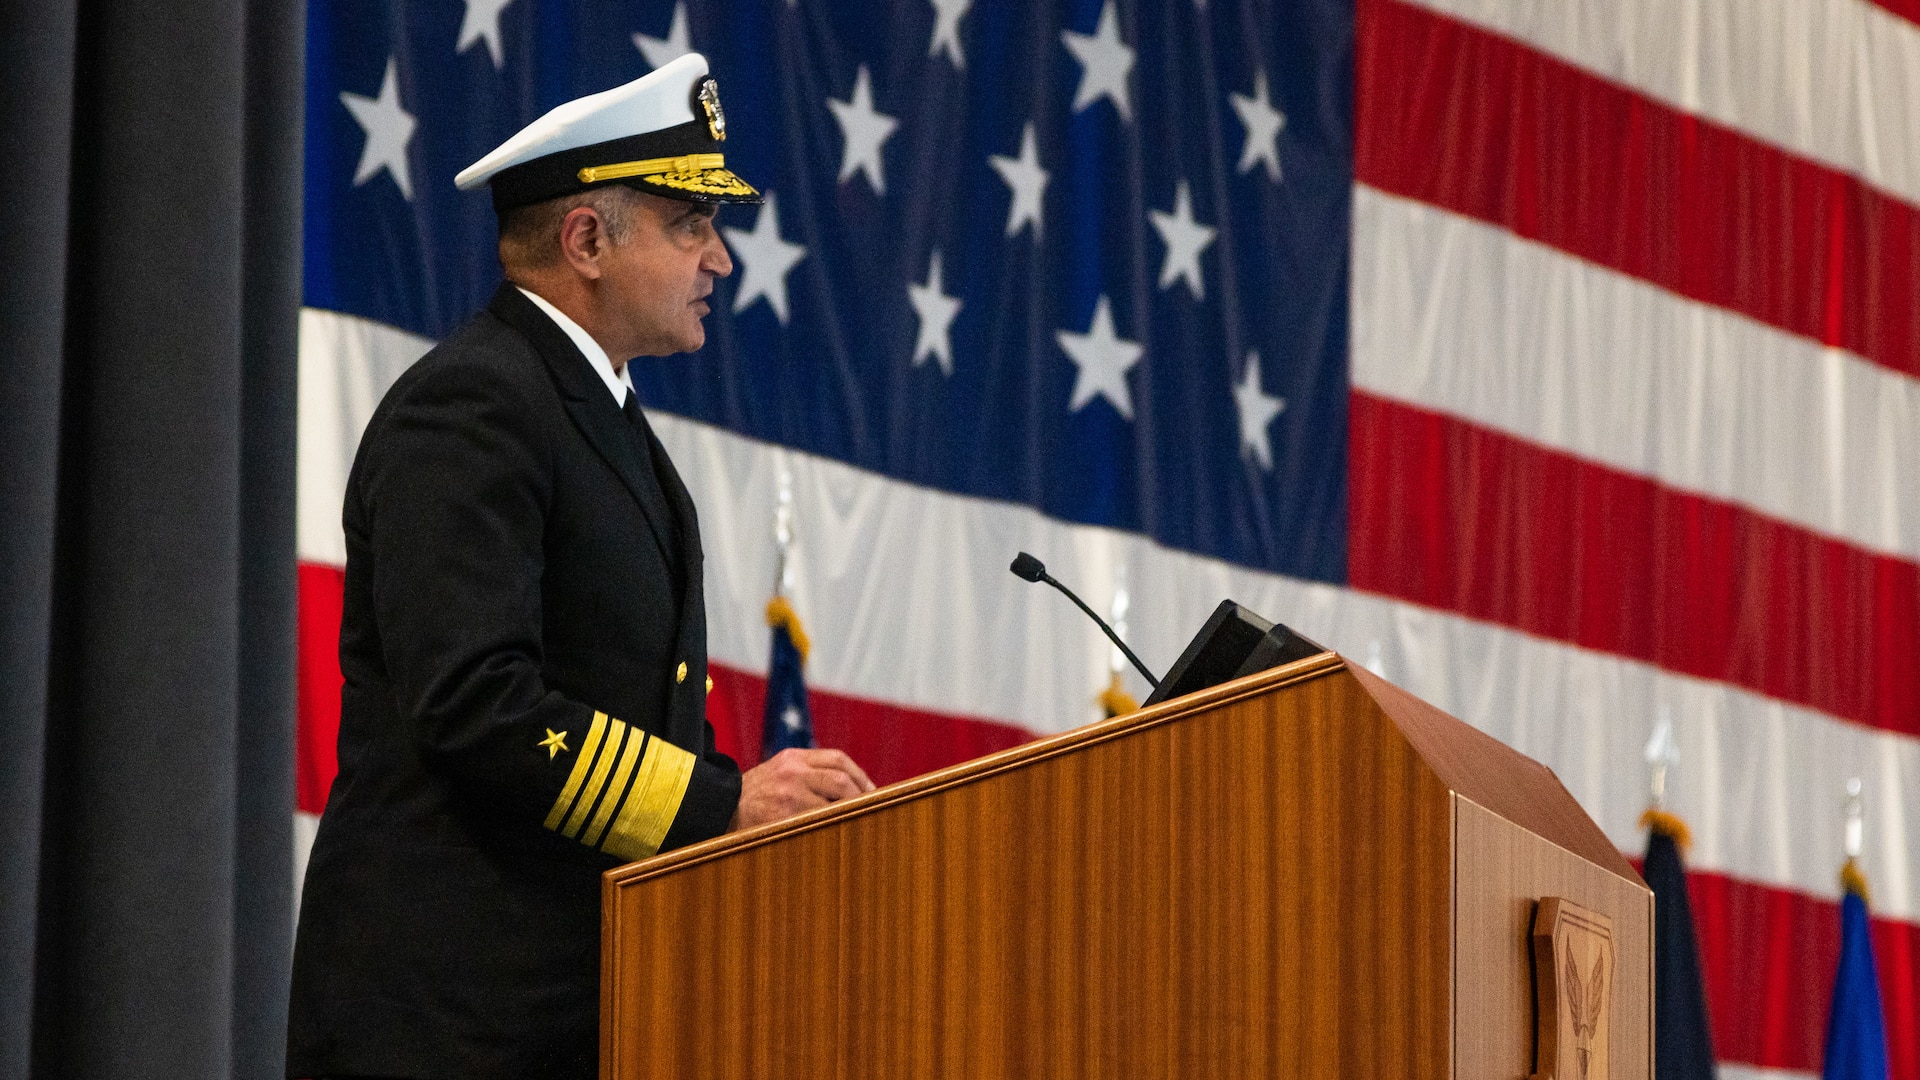 Adm. Charles Richard, U.S. Strategic Command commander, makes remarks at the Air Force Global Strike Command change of command ceremony at Barksdale Air Force Base, Louisiana, Aug. 27, 2021. As U.S. Strategic Command, deters strategic attack and employs forces, as directed, to guarantee the security of our nation and our allies. (U.S. Air Force photo by Airman 1st Class William Pugh)